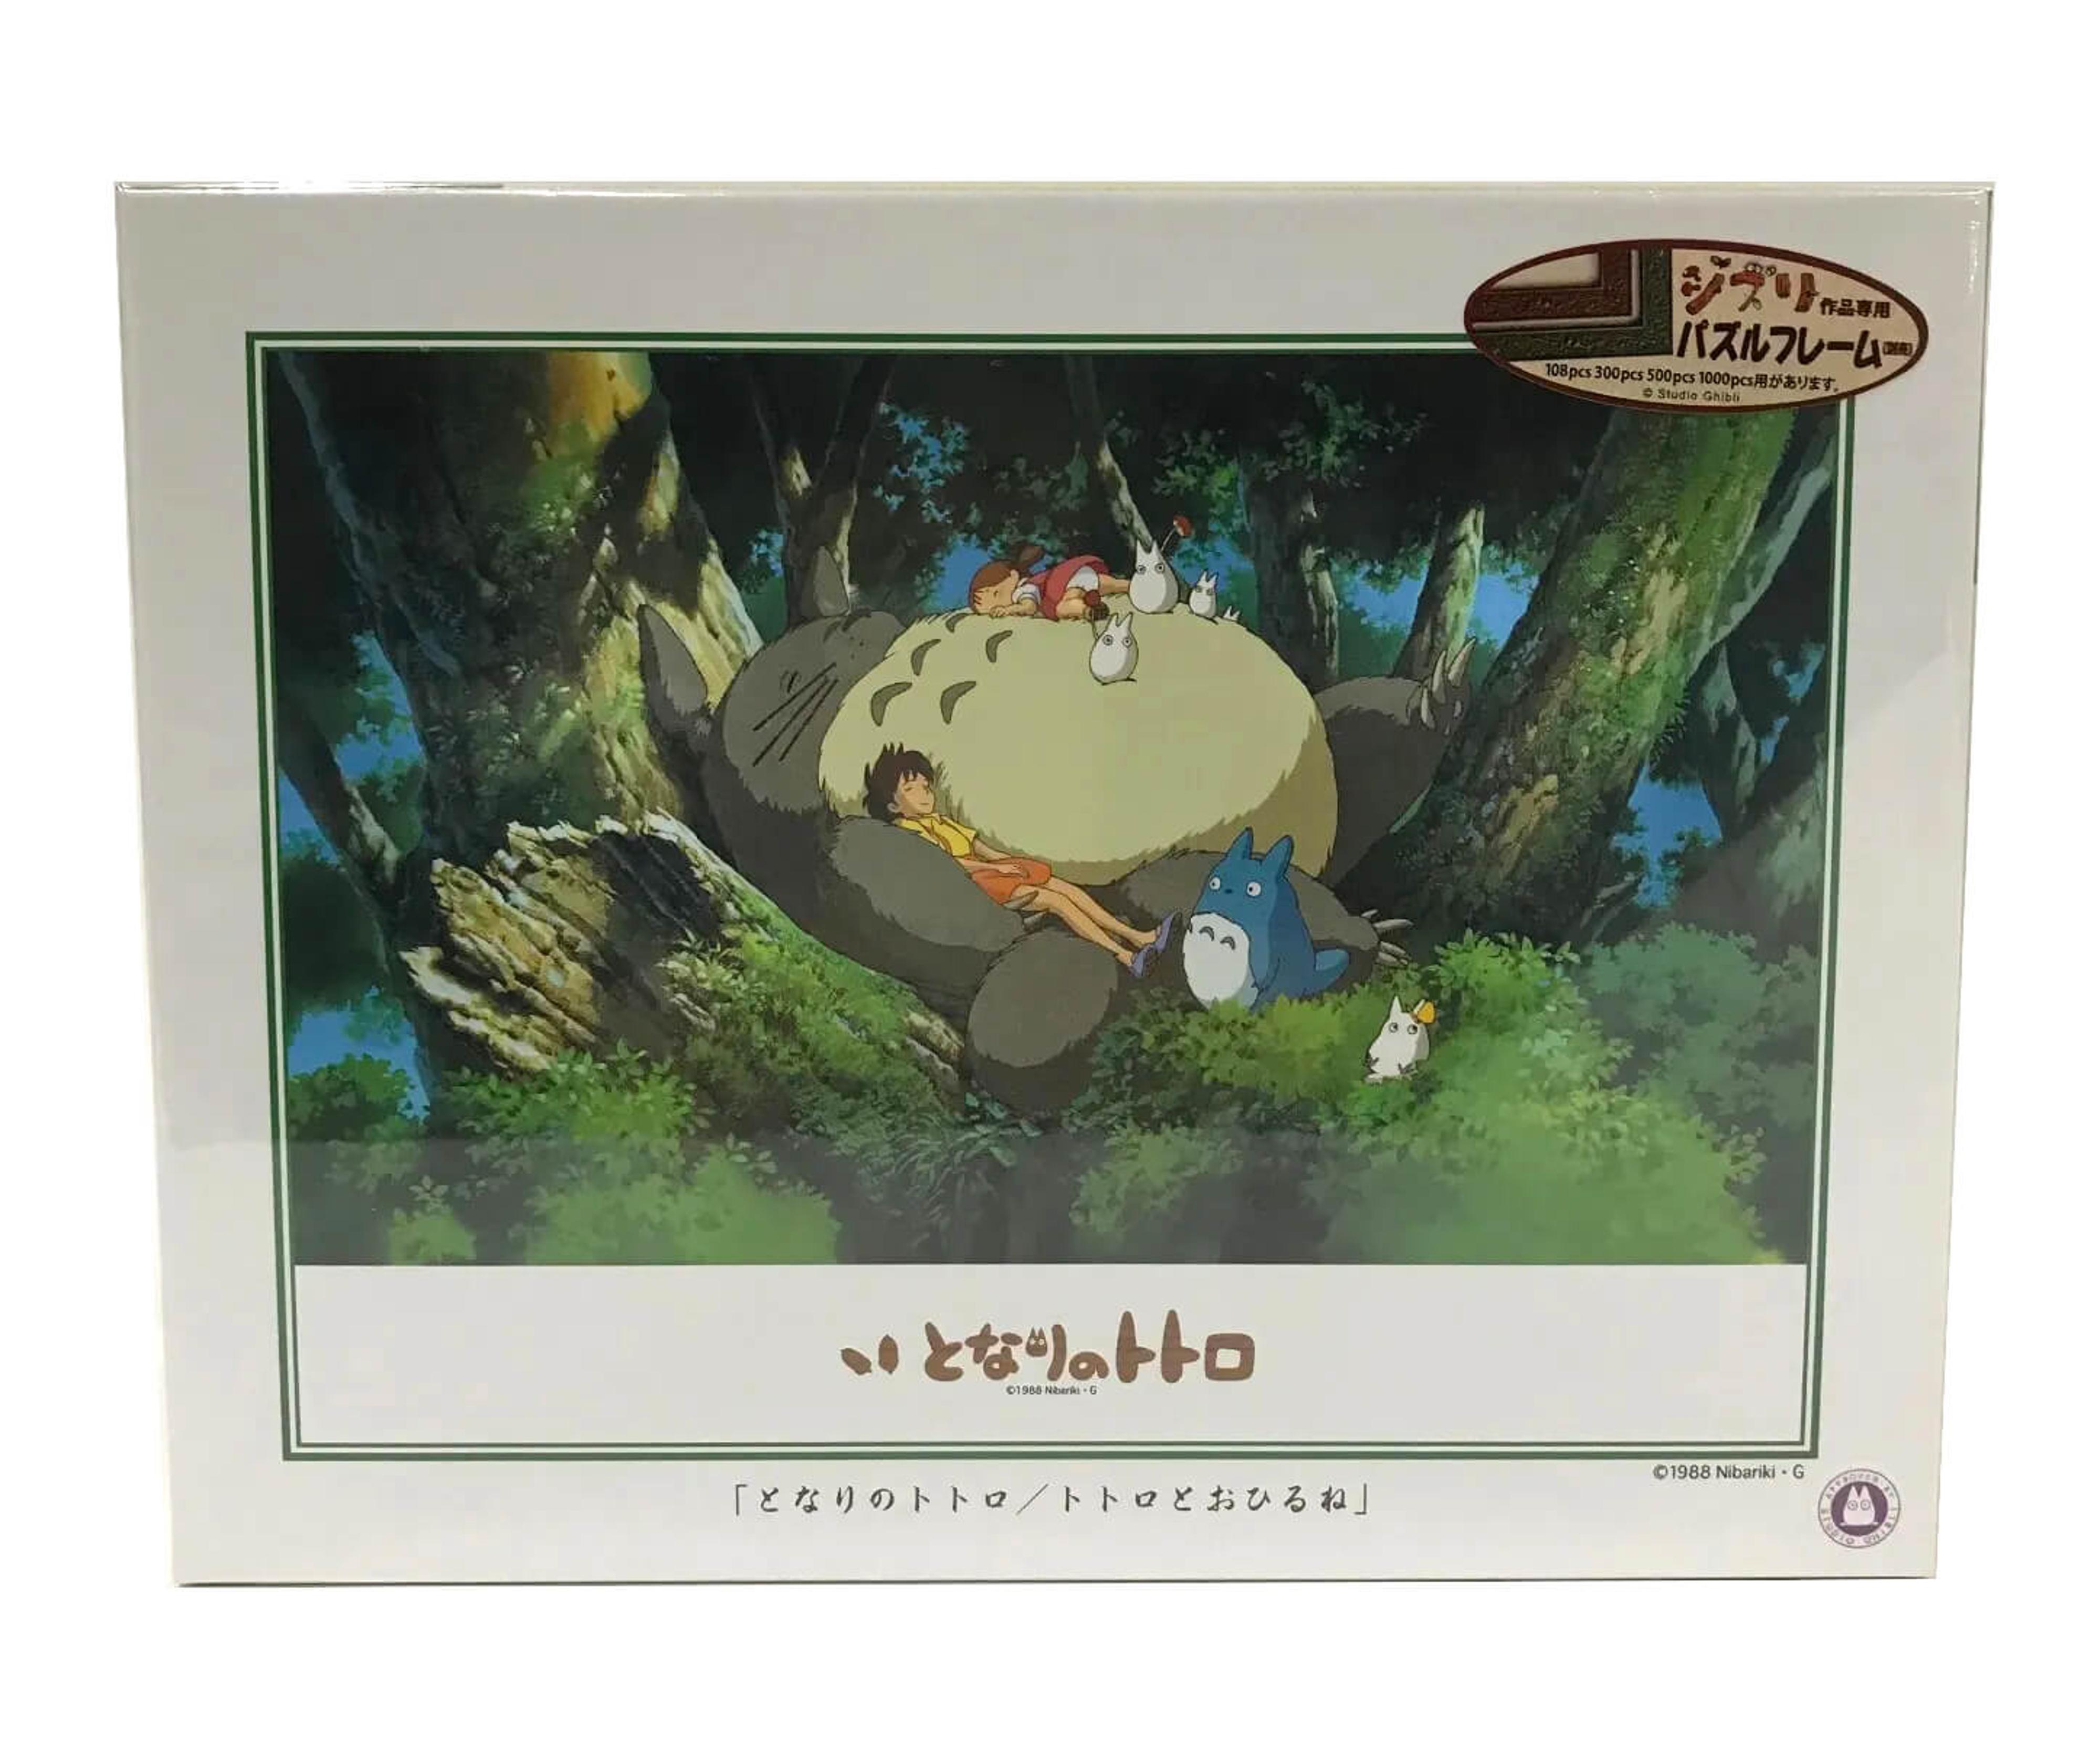 Napping with Totoro Puzzle (500 pc)